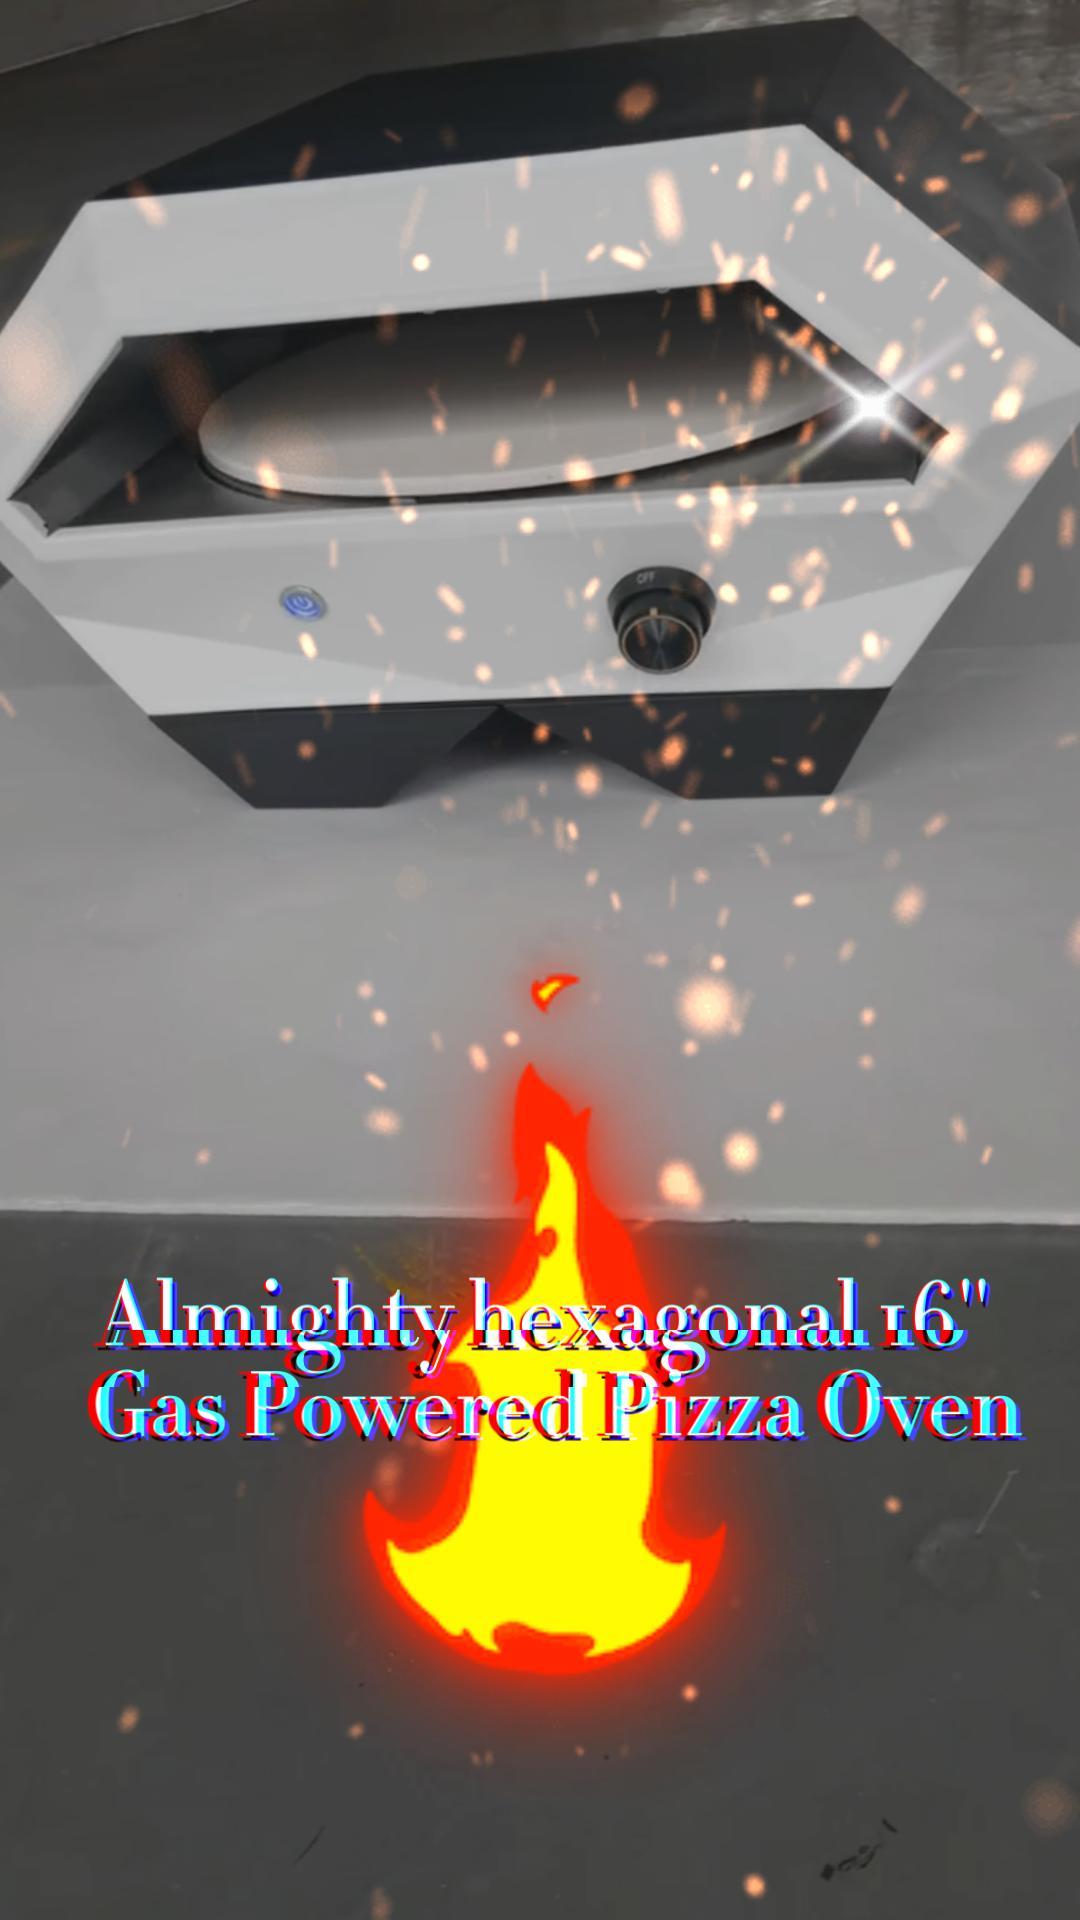 Almighty hexagonal 16'' Gas Powered Pizza Oven